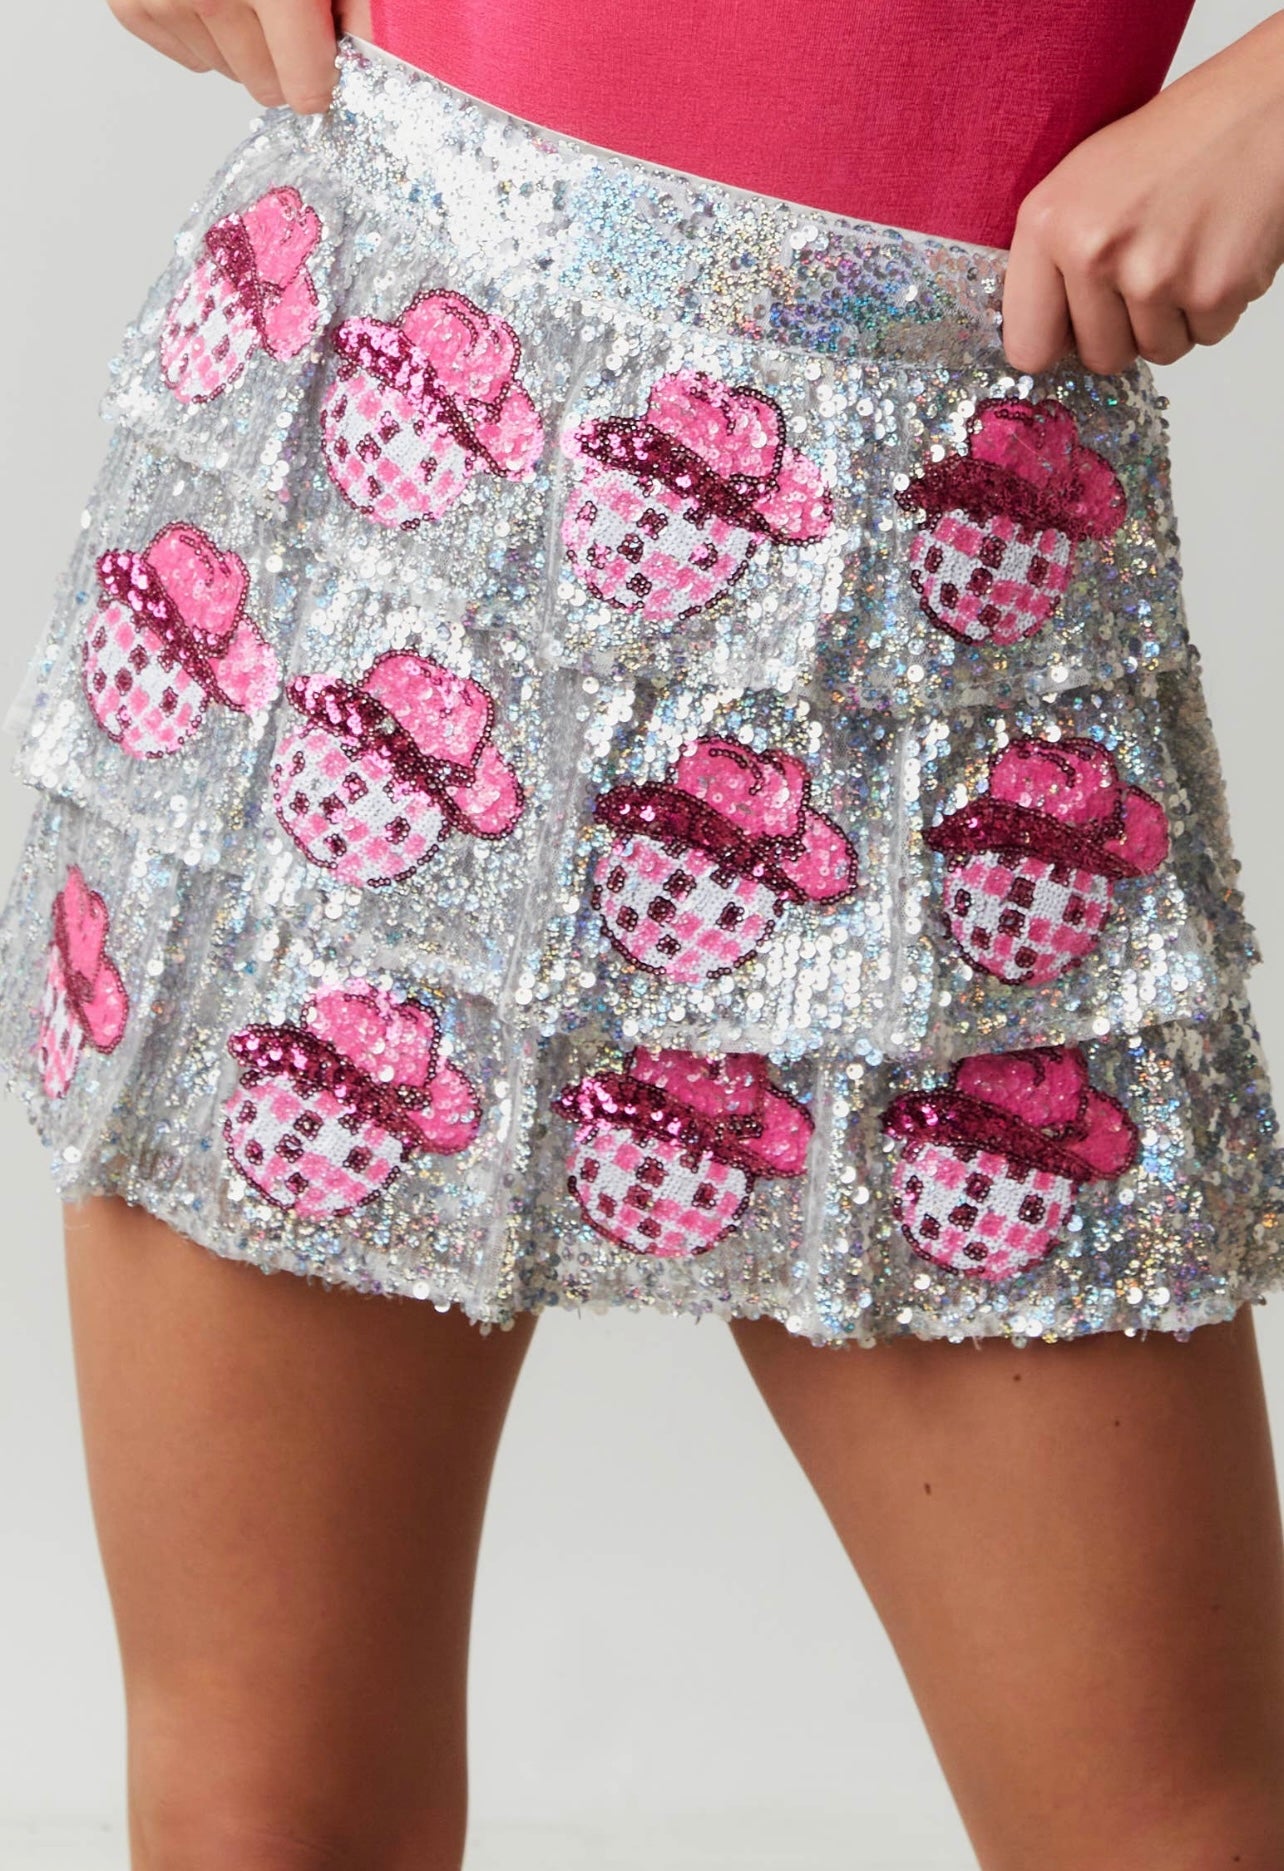 Cowgirl disco ball patch sequin skirt